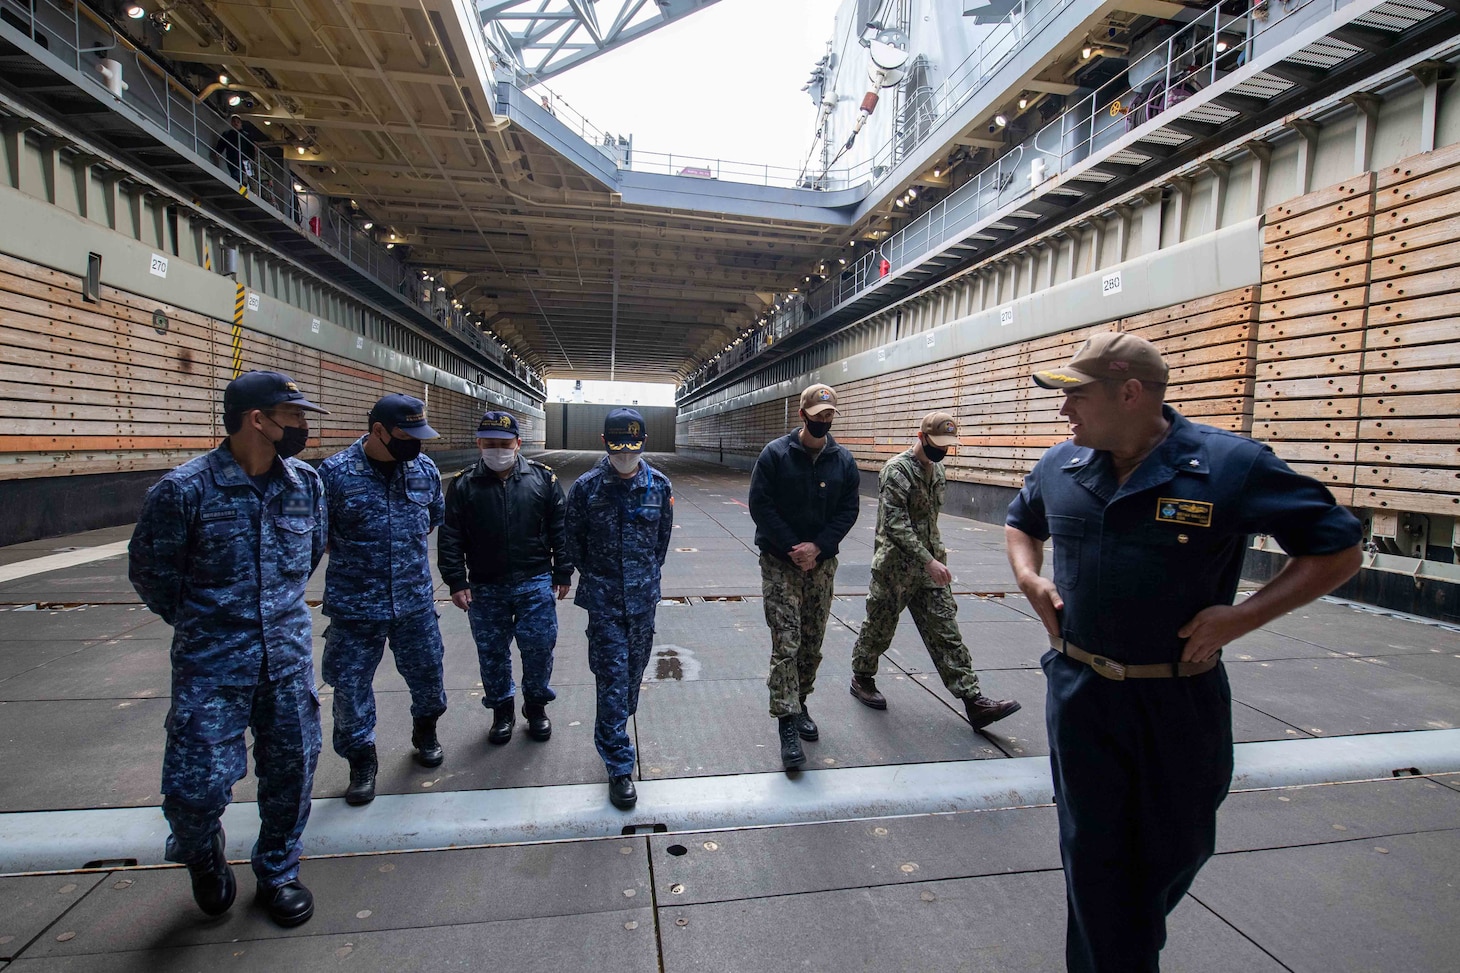 Cmdr. Bryan Gallant, the executive officer aboard the forward-deployed amphibious dock landing ship USS Rushmore (LSD 47), conducts a tour of the ship’s well deck for allies from the Japan Maritime Self-Defense Force. Rushmore, part of Amphibious Squadron 11, is operating in the U.S. 7th Fleet area of responsibility to enhance interoperability with allies and partners and serve as a ready response force to defend peace and stability in the Indo-Pacific region.